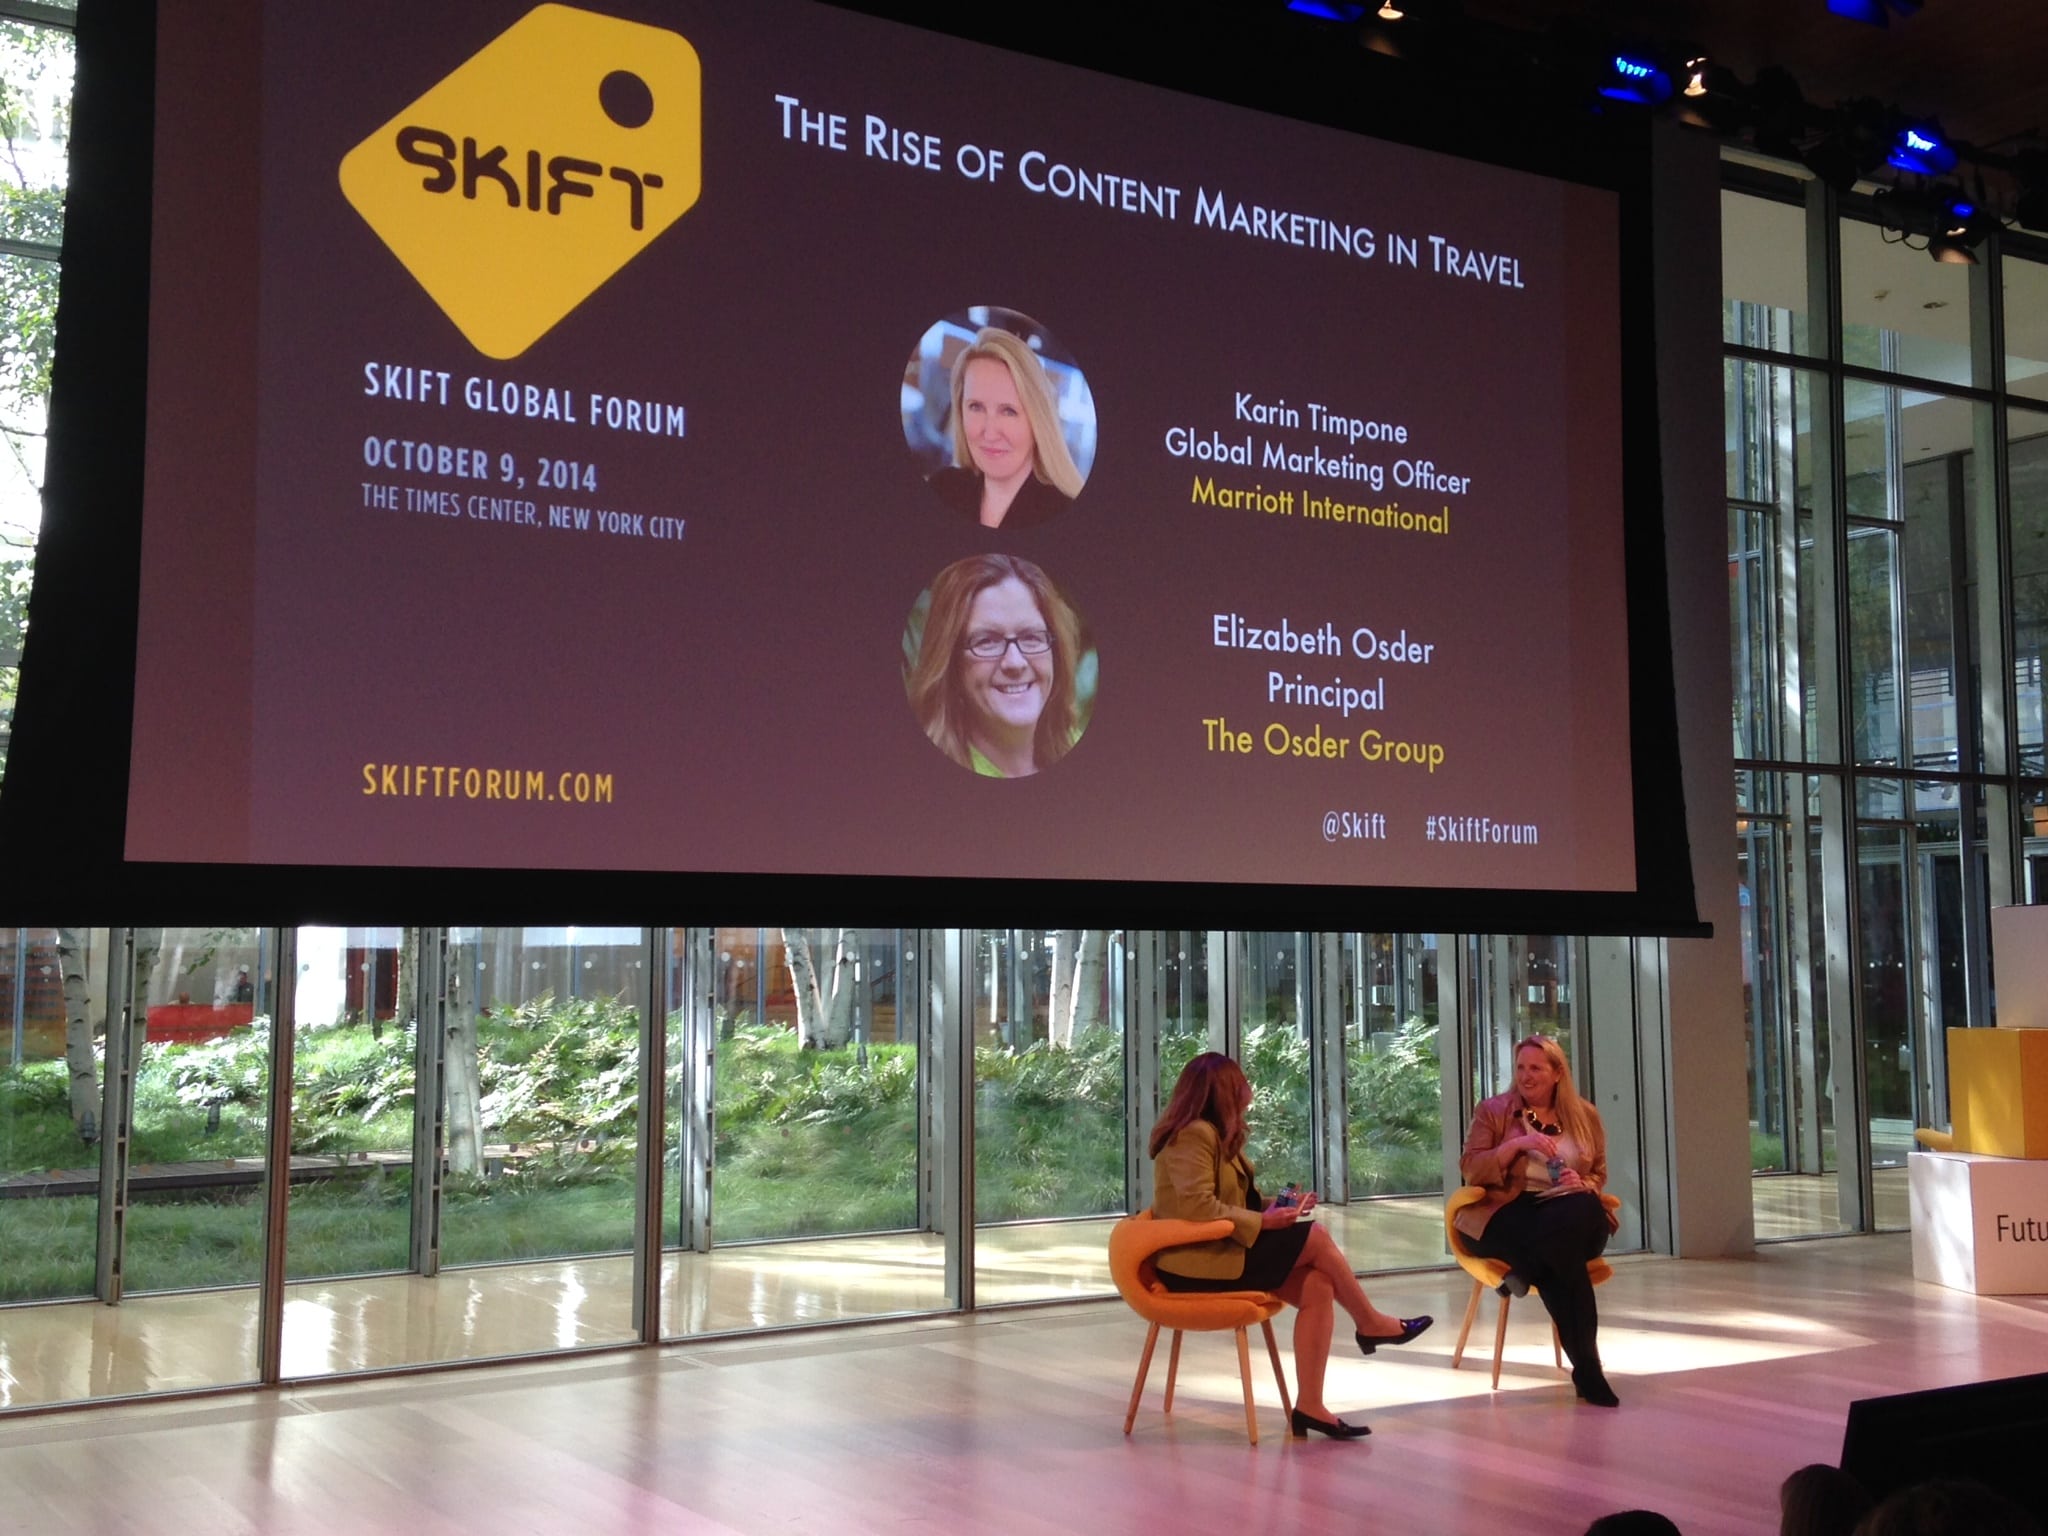 Karin Timpone (right) and moderator Elizabeth Osder speaking at Skift Global Forum in New York City on Oct. 9, 2014. 